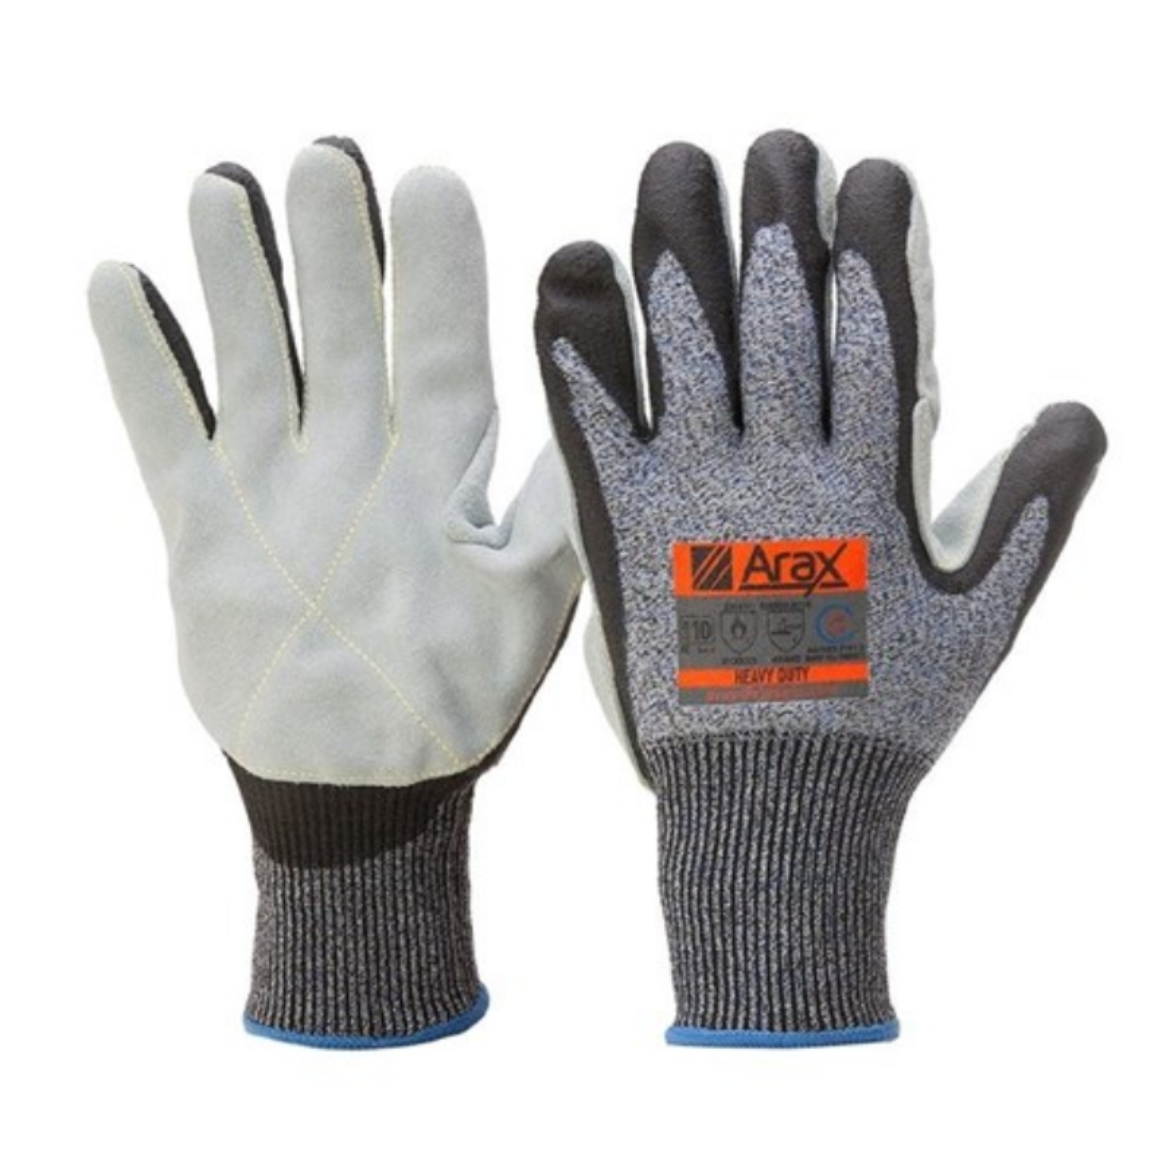 Picture of ARAX HEAVY DUTY - ARAX LINER WITH FOAM NITRILE/CHROME LEATHER PALM GLOVES. AVAILABLE IN SIZES 7/8/9/10/11